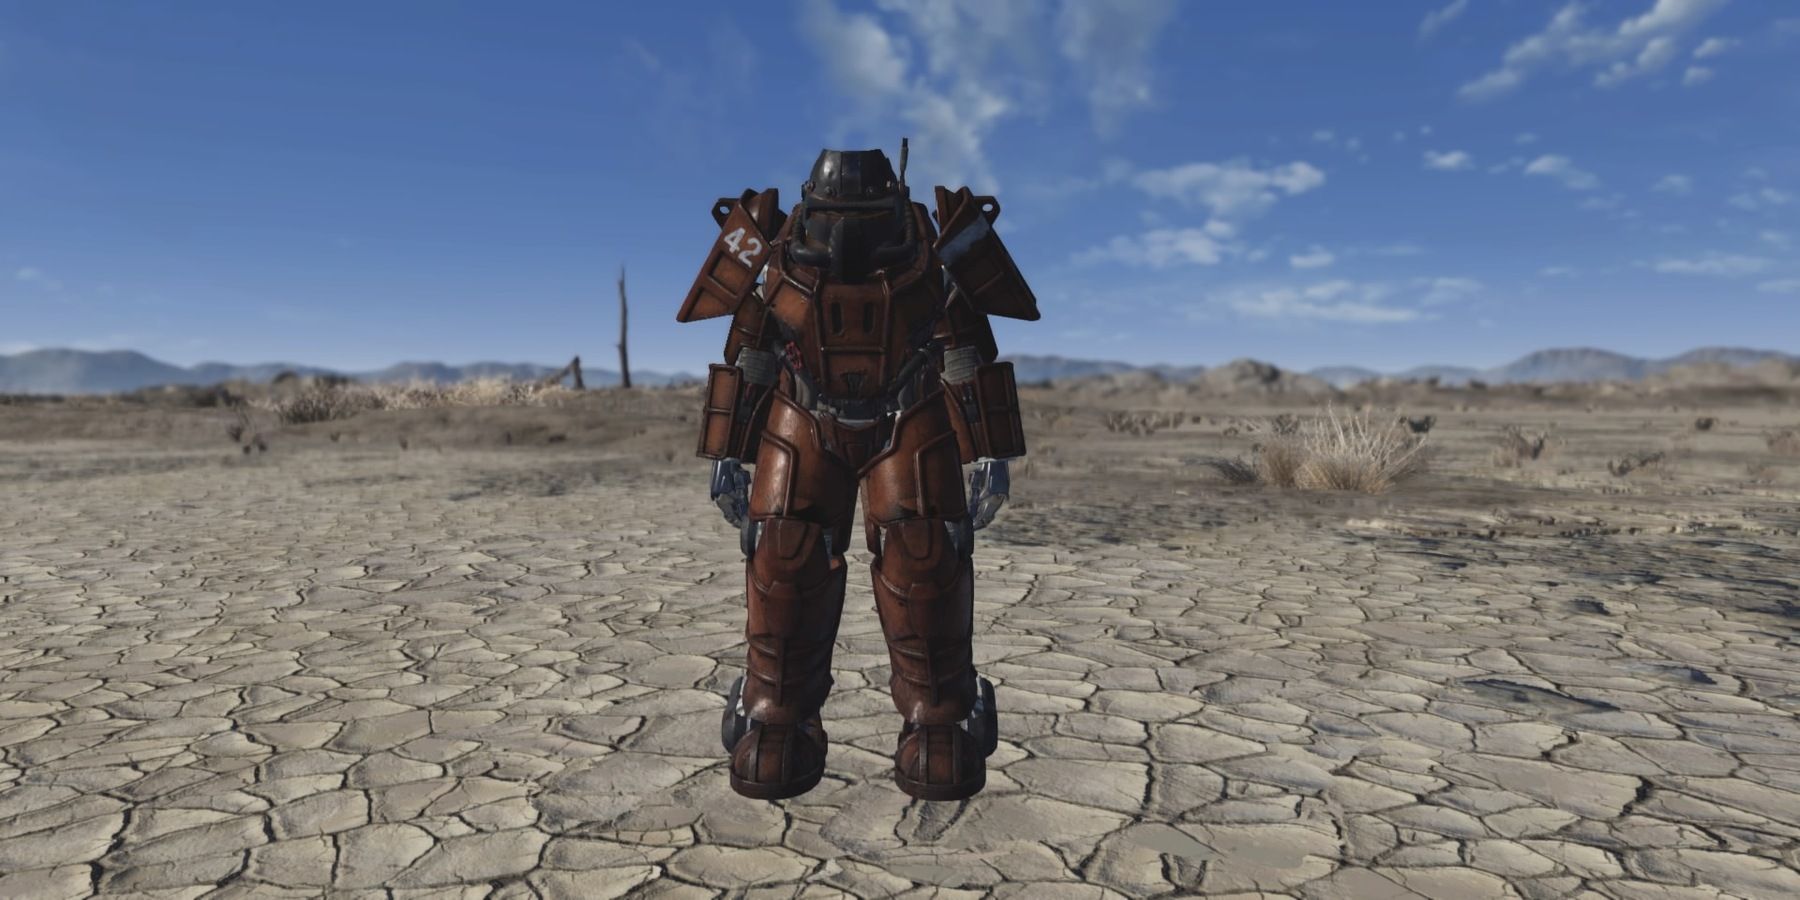 Union Power Armor in Fallout 76